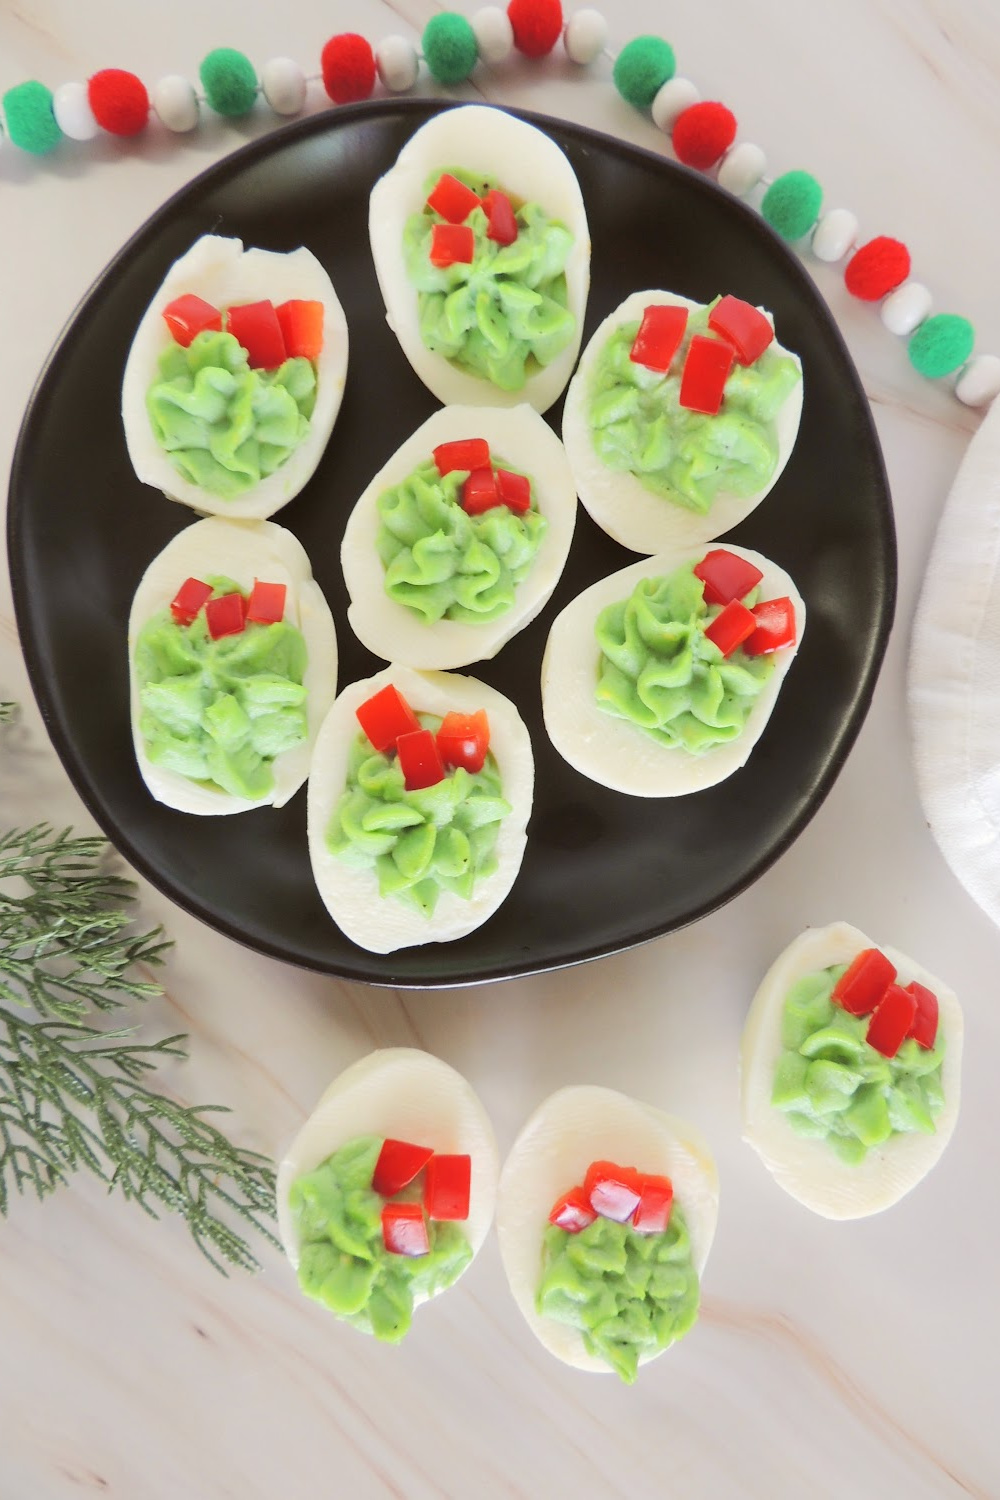 A tray of Christmas deviled eggs that look like a Christmas wreath.